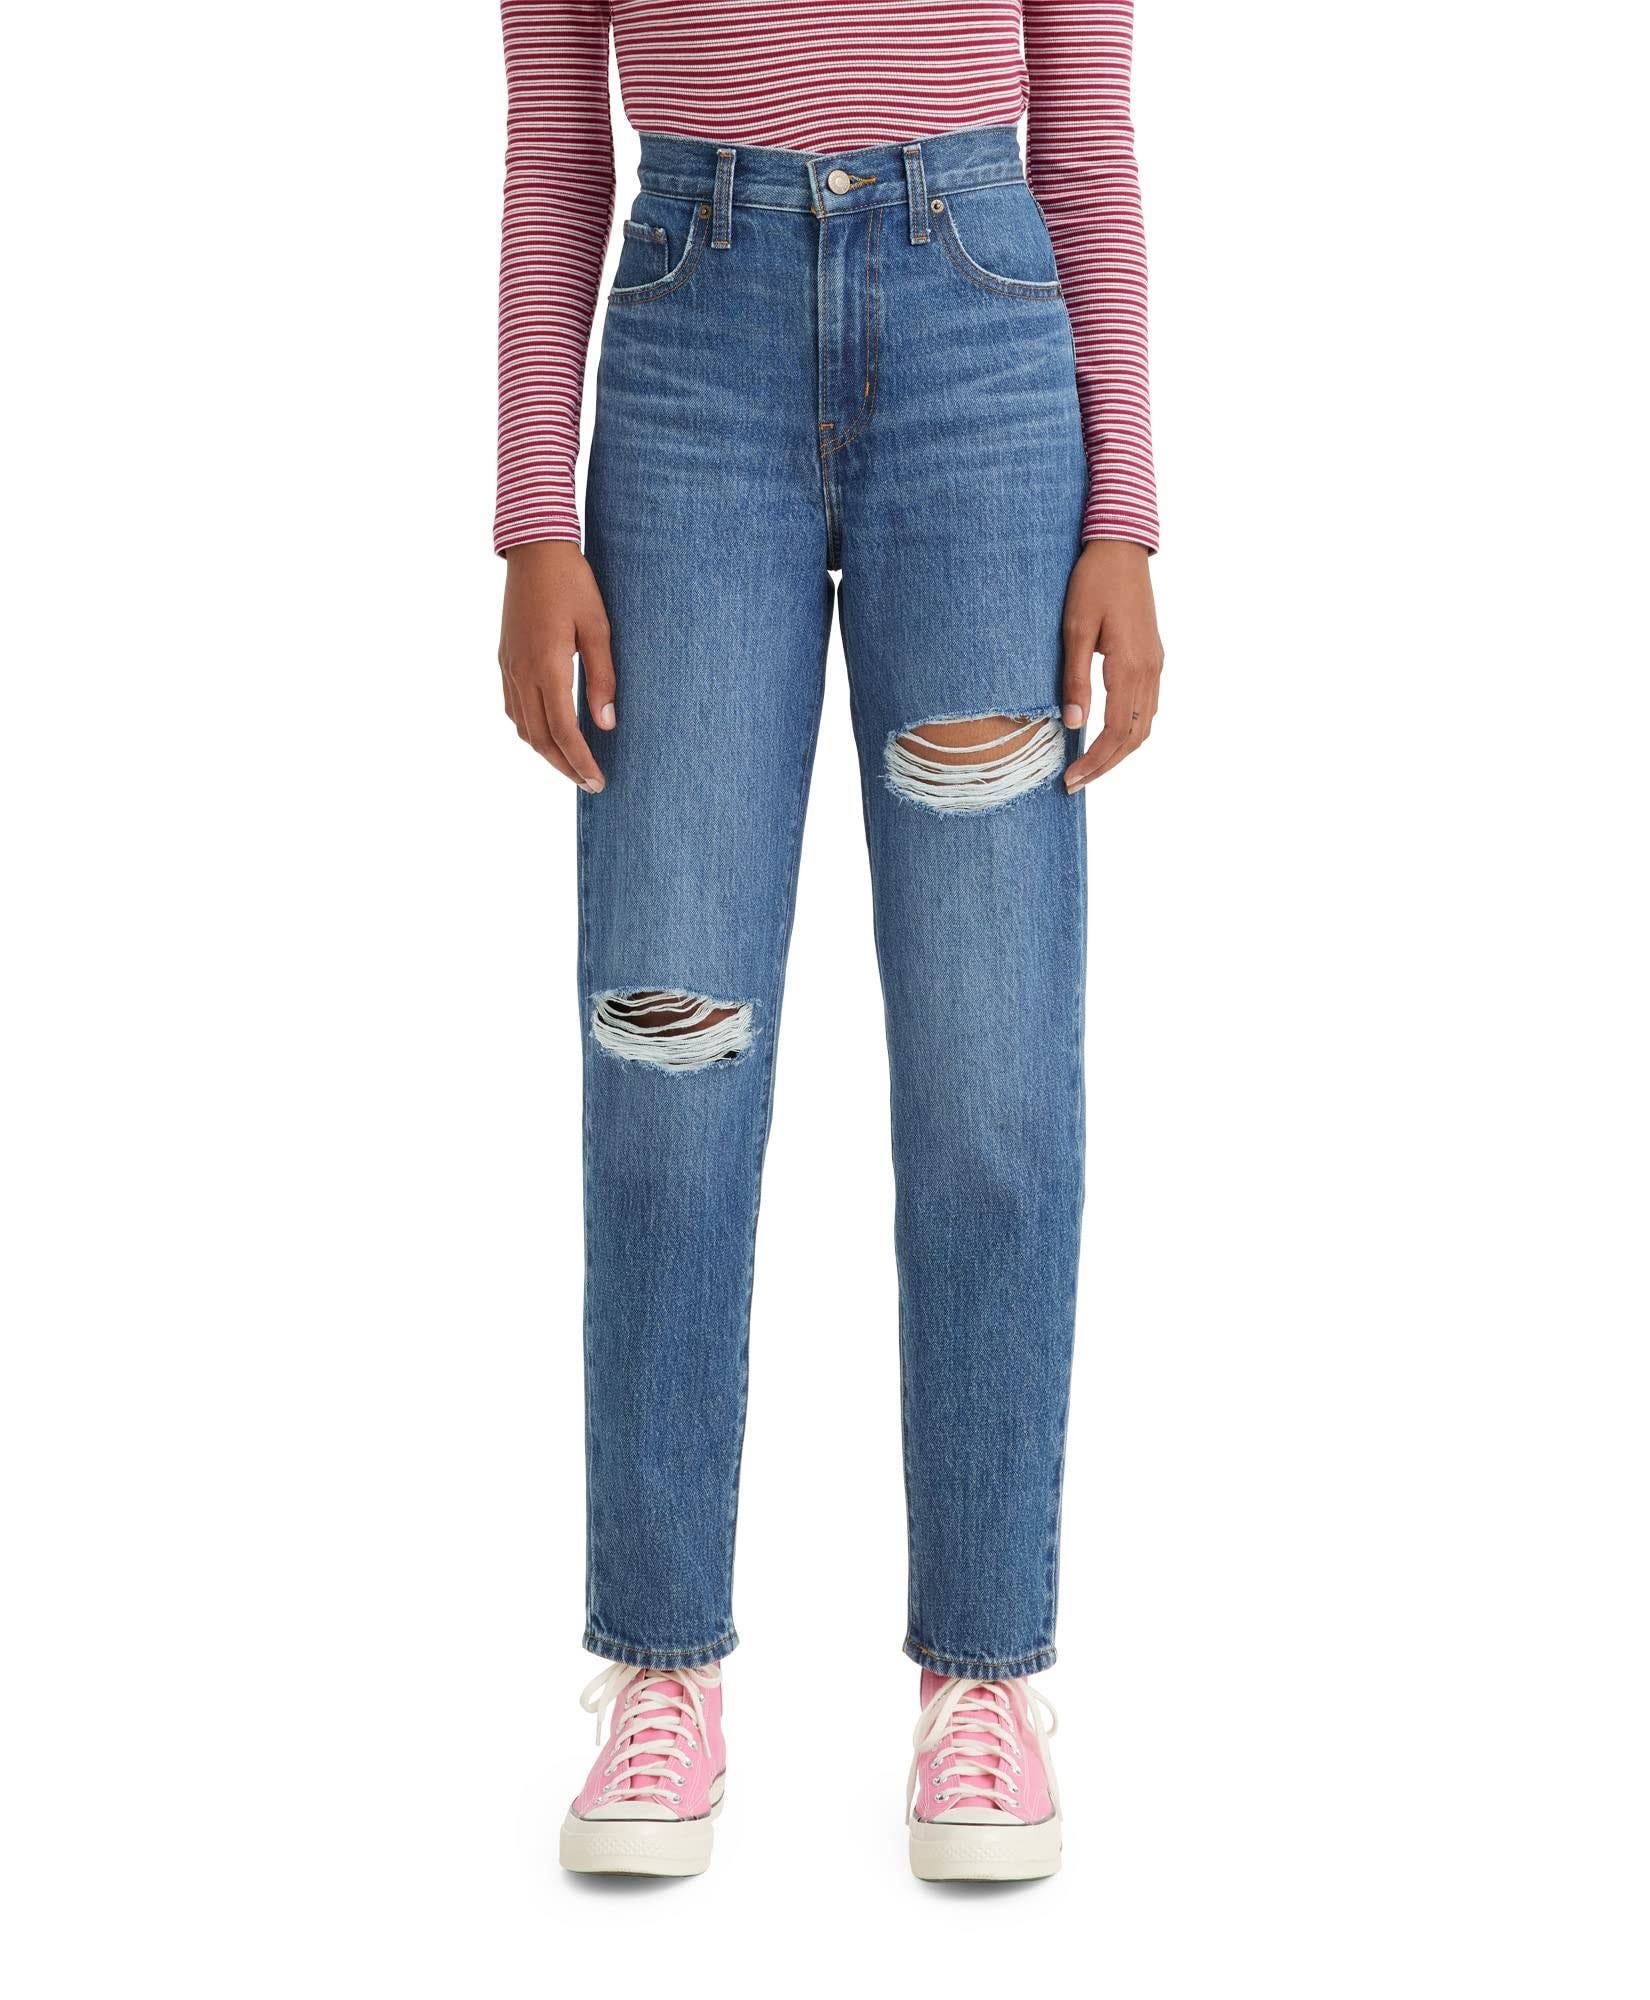 Vintage-Inspired High-Waisted Mom Jeans | Image